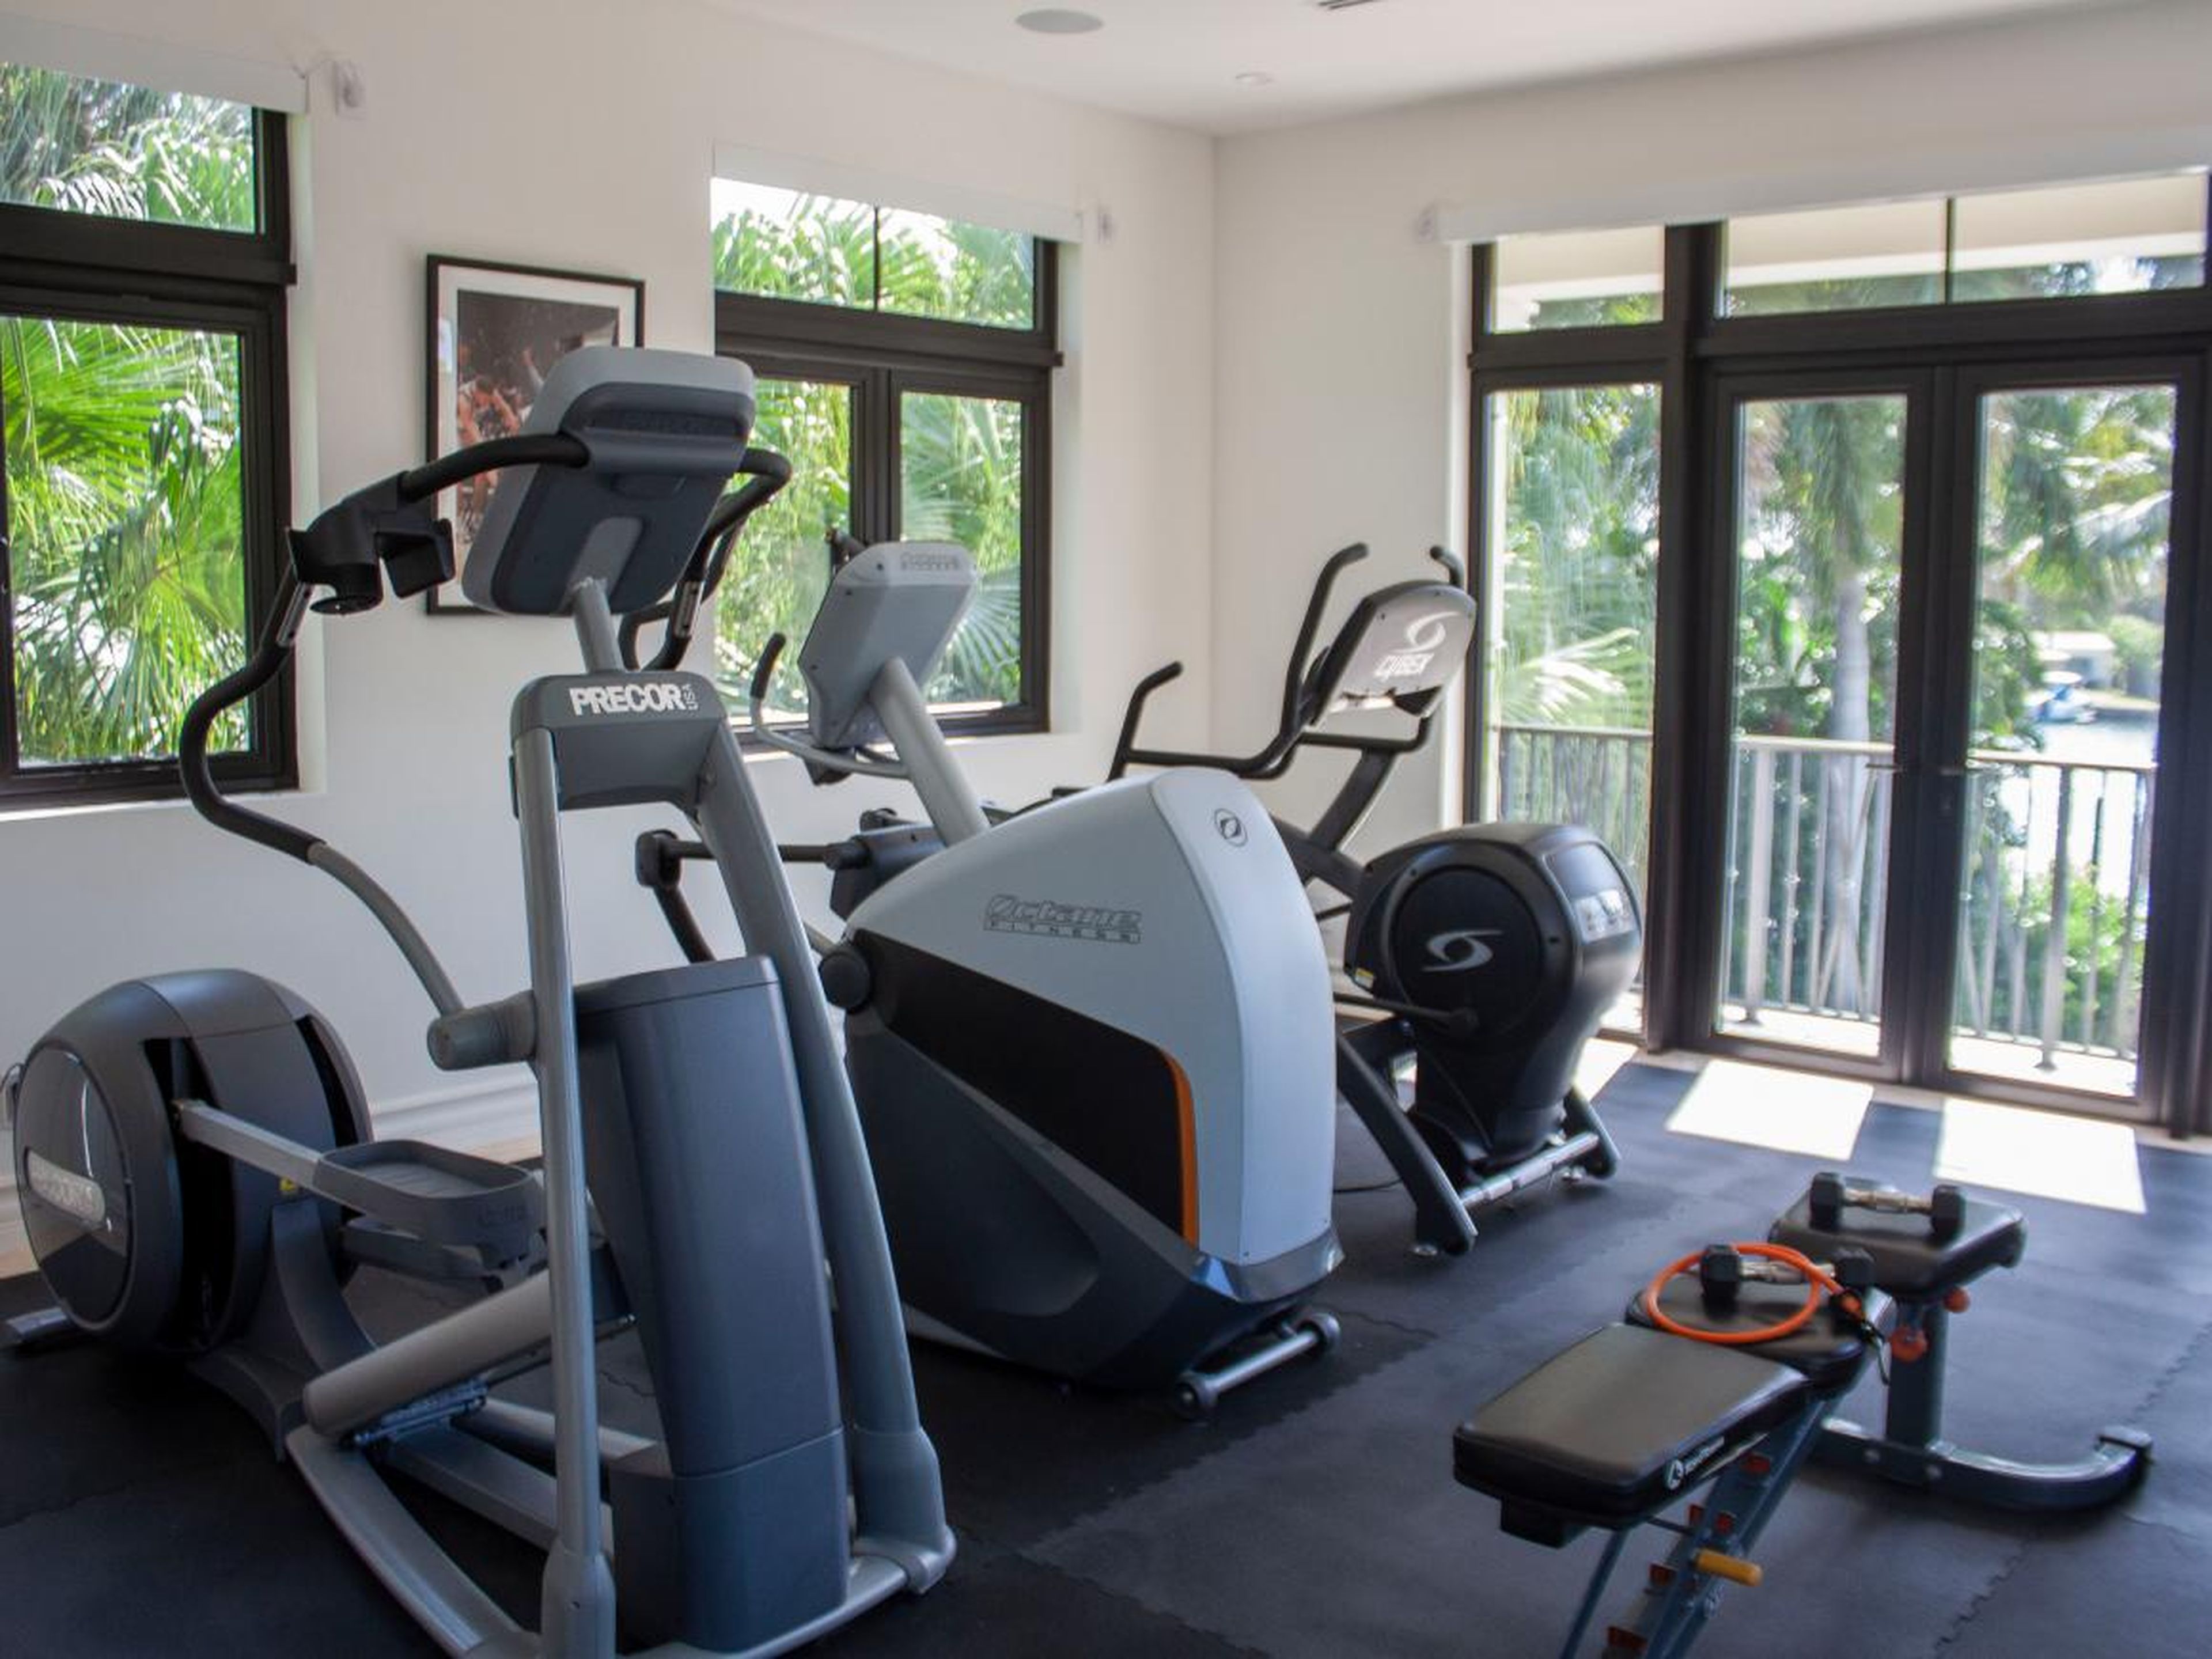 One sunny room is set up as a home gym, but it could also be turned into another bedroom.